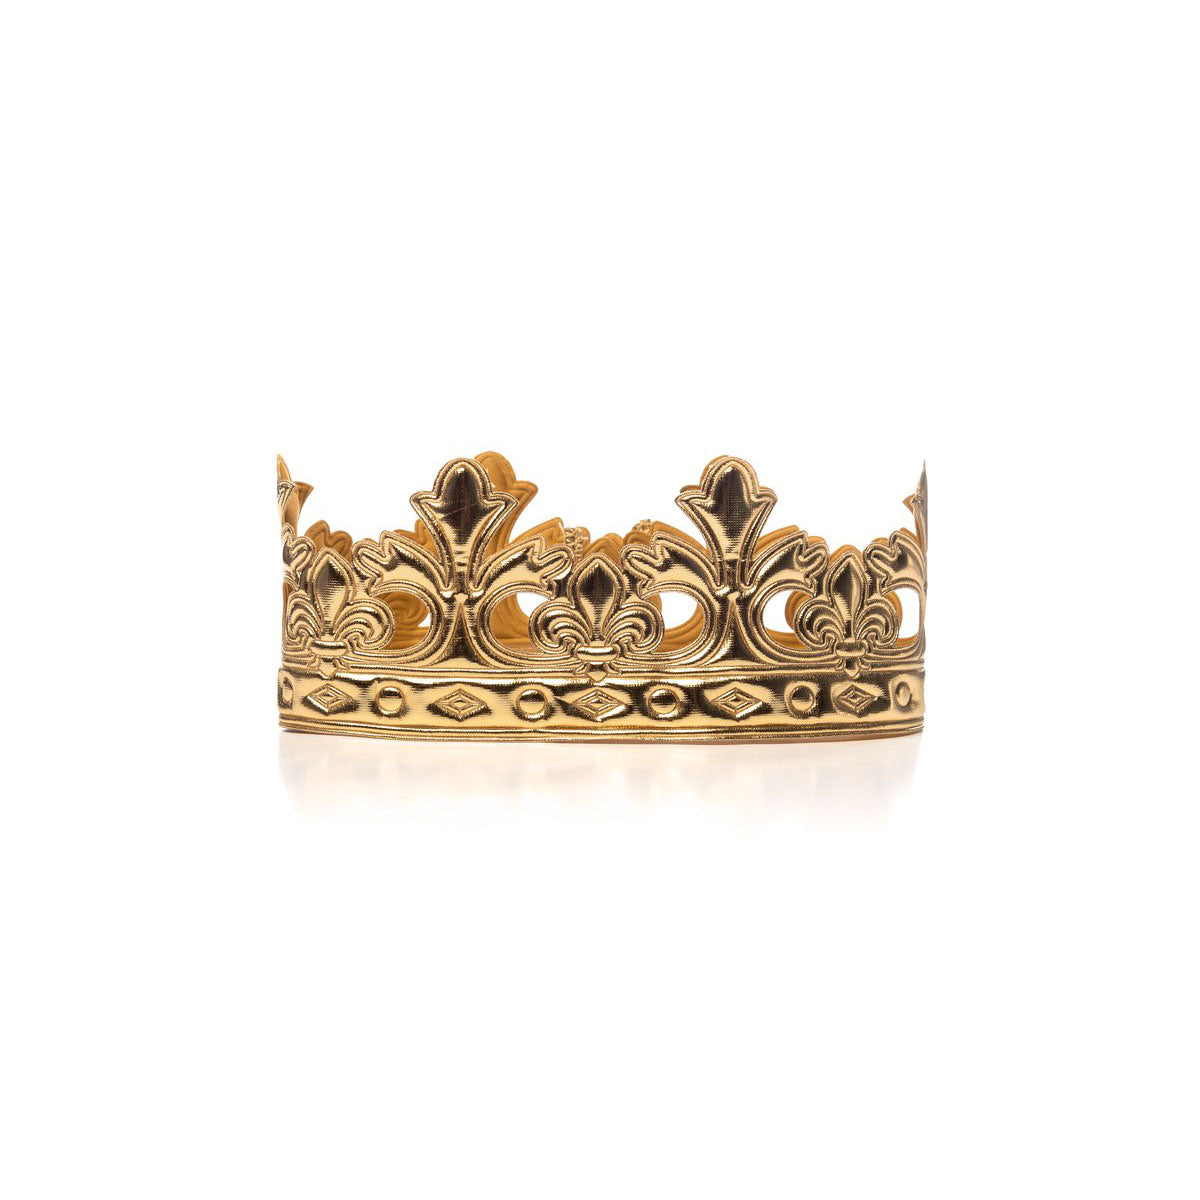 Gold Prince Soft Crowns from Little Adventures